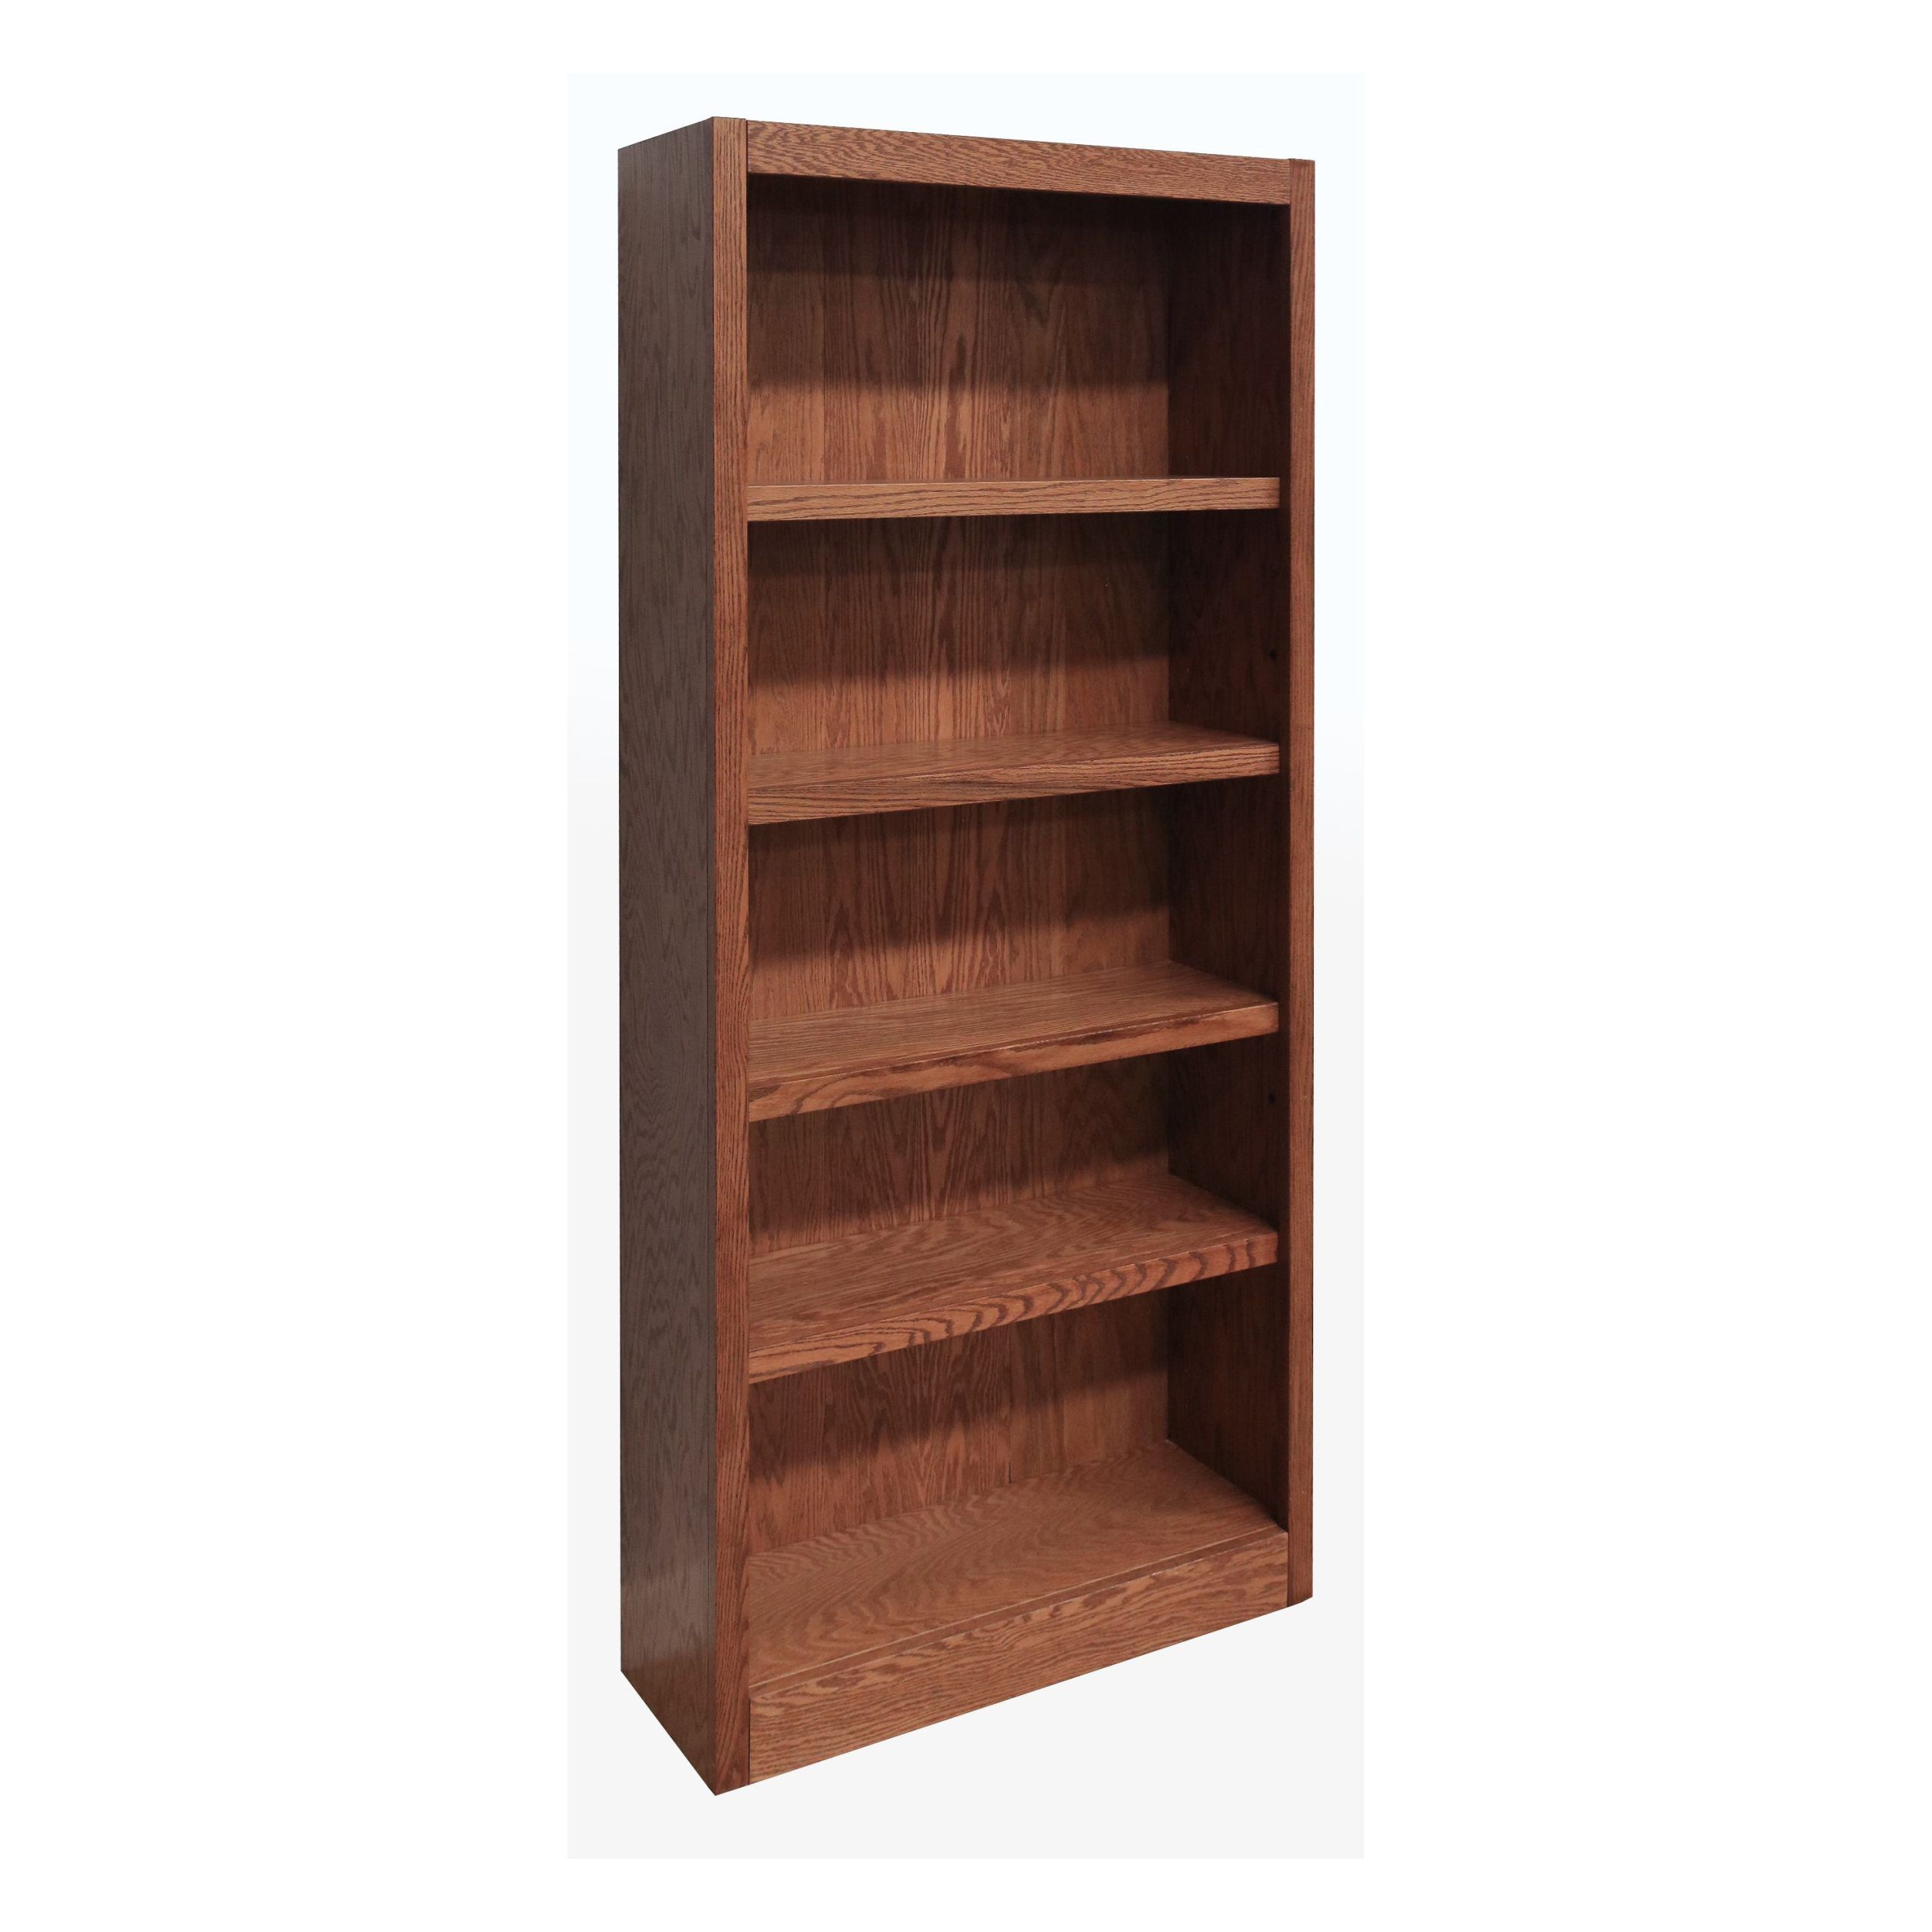 Concepts In Wood 5 Shelf Wood Bookcase, 72 Inch Tall – Oak Finish –  Walmart In 72 Inch Bookcases (View 5 of 15)